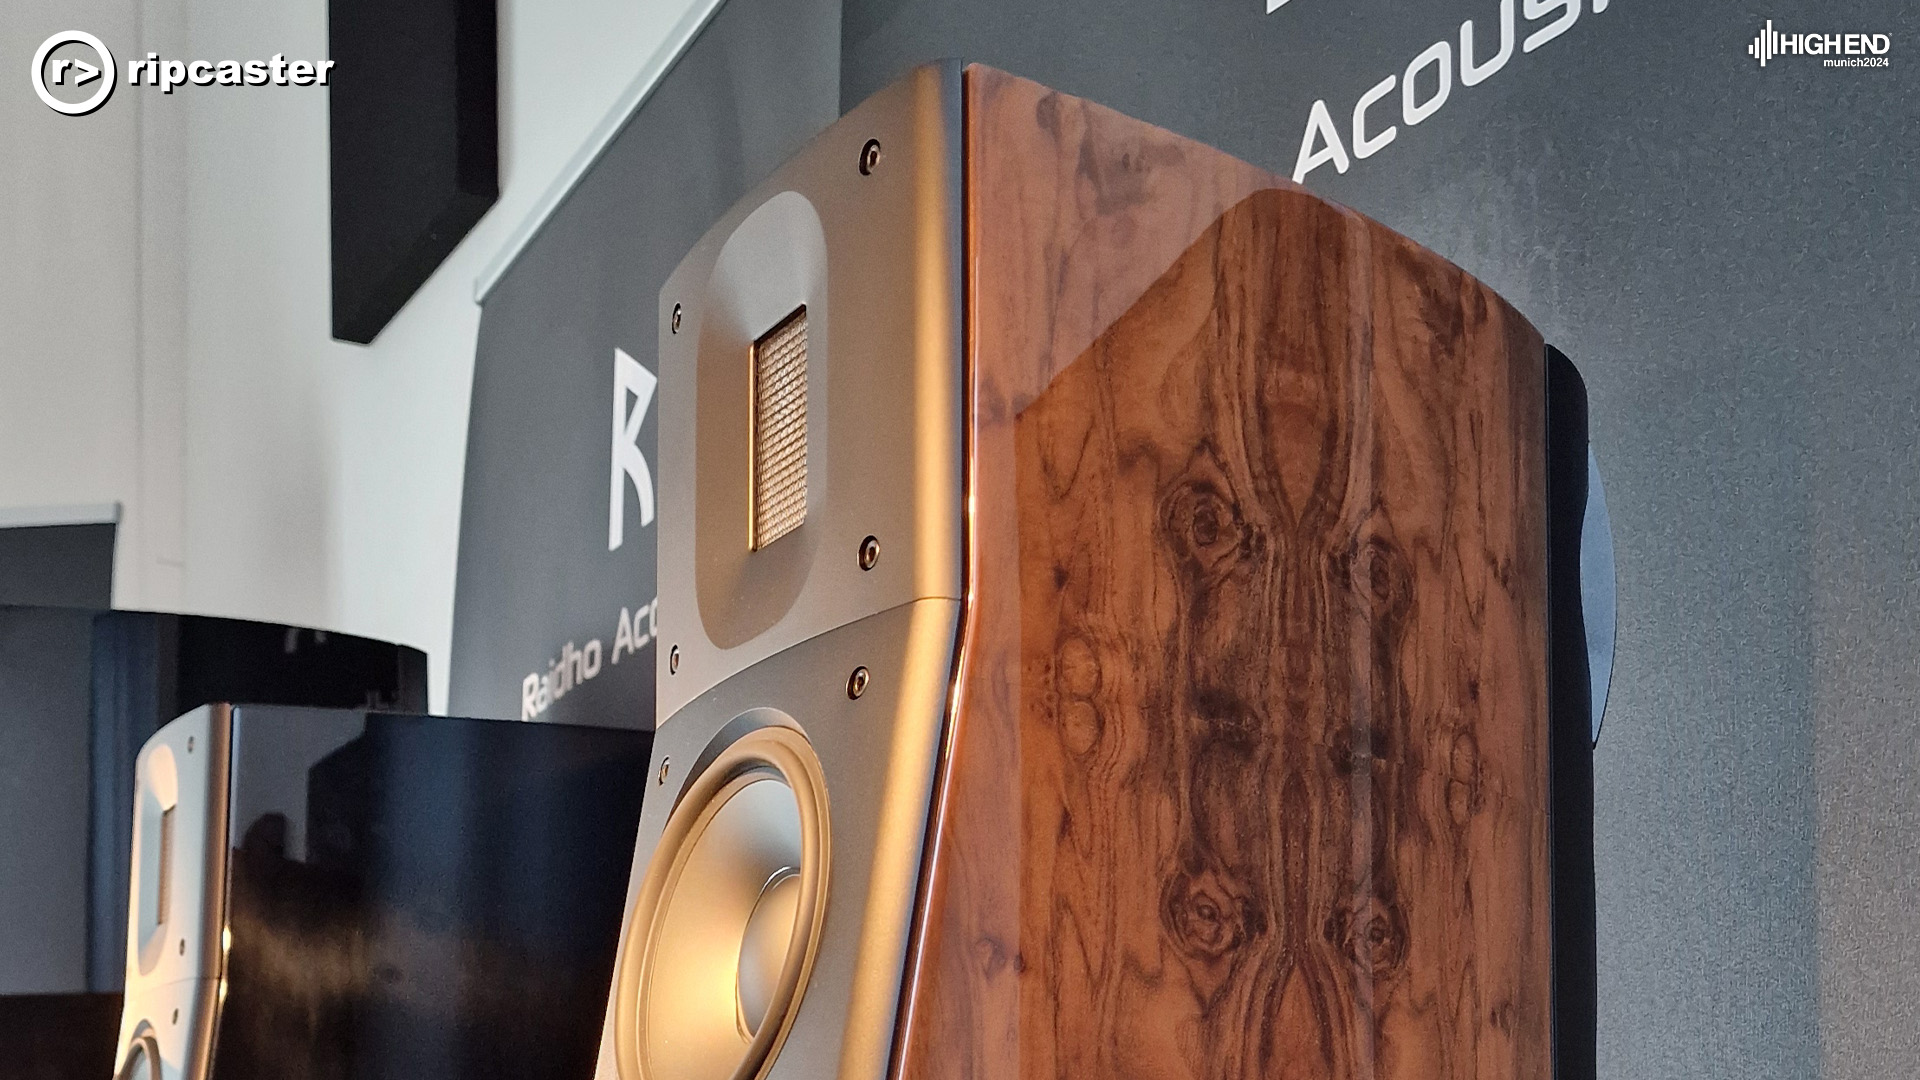 A close-up of a Raidho speaker showing the burl finish nicely.  The front of it has a gold tinge to it.